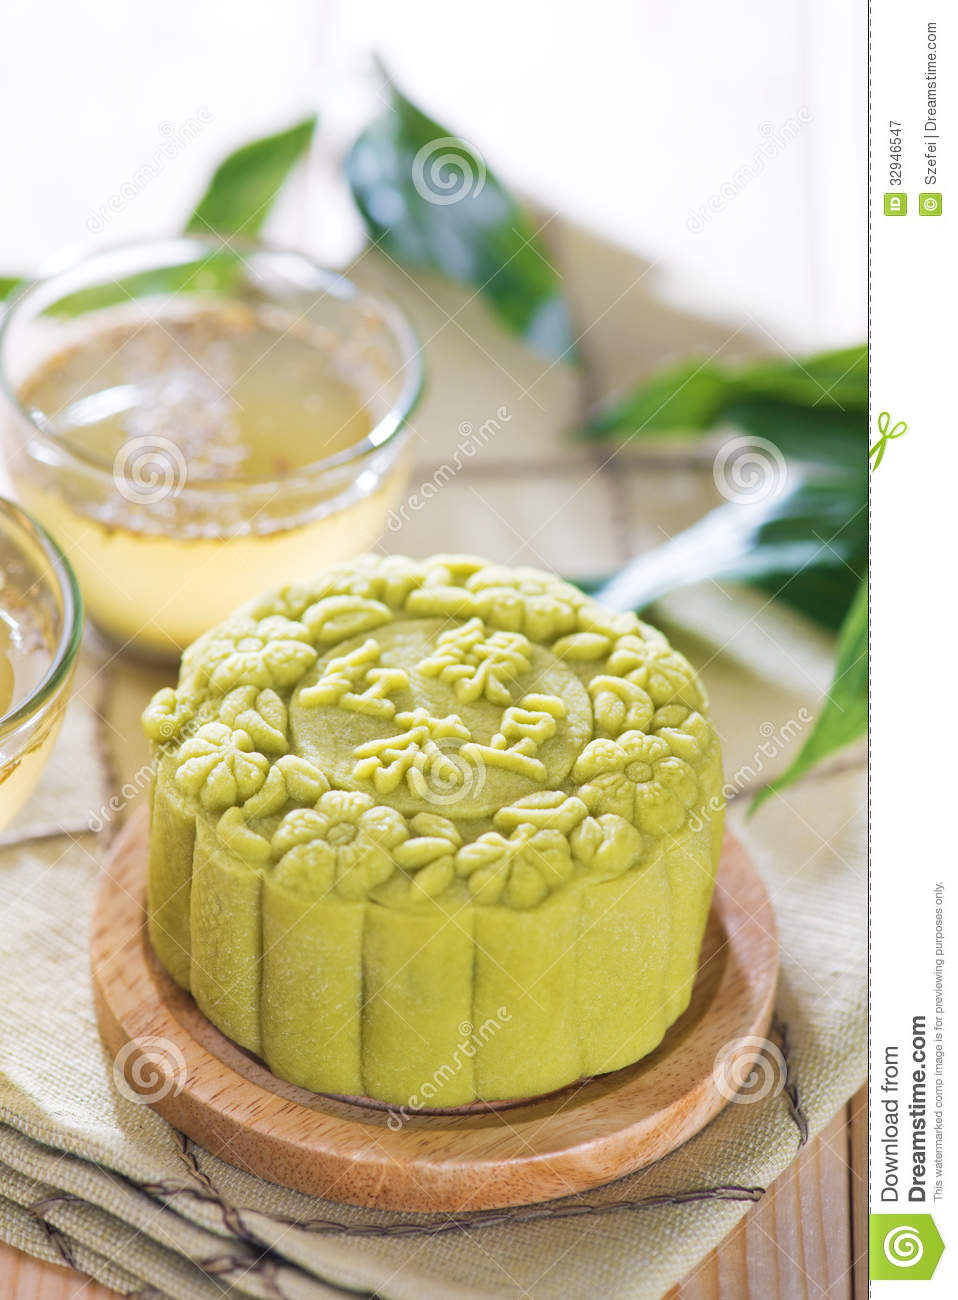 Green Tea With Red Bean Paste Mooncake Royalty Free Stock Photography